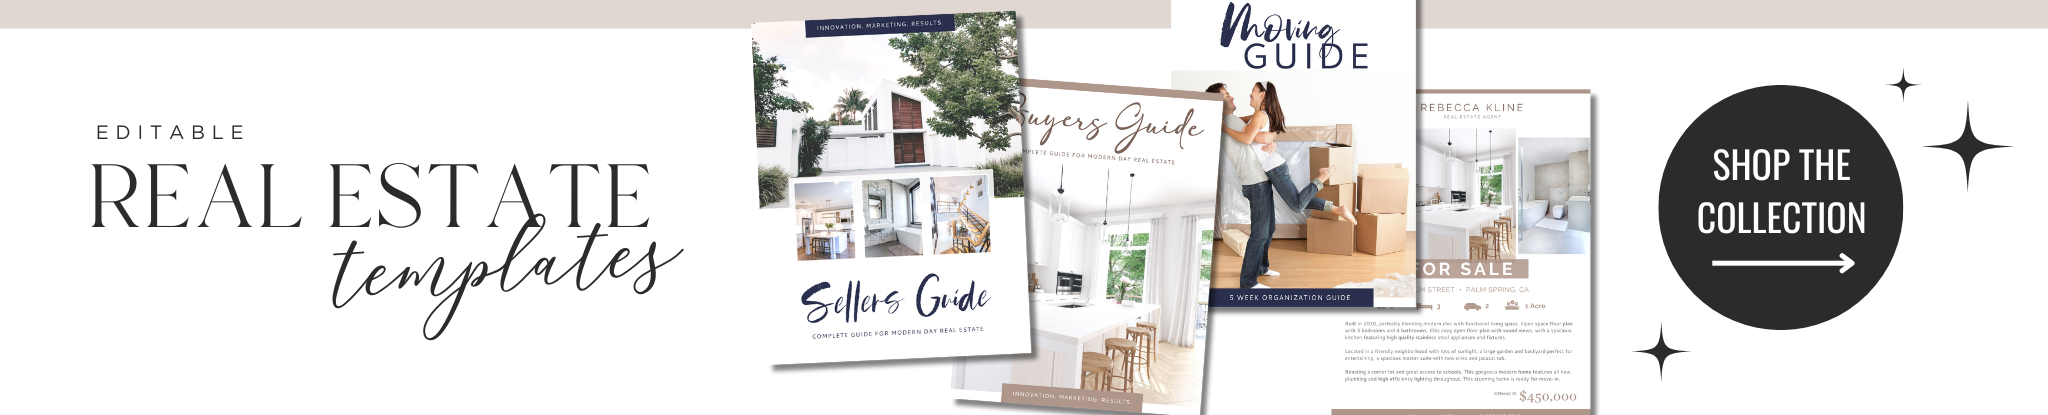 Sellers Guide Templates for Real Estate Easy to Edit Canva Slides